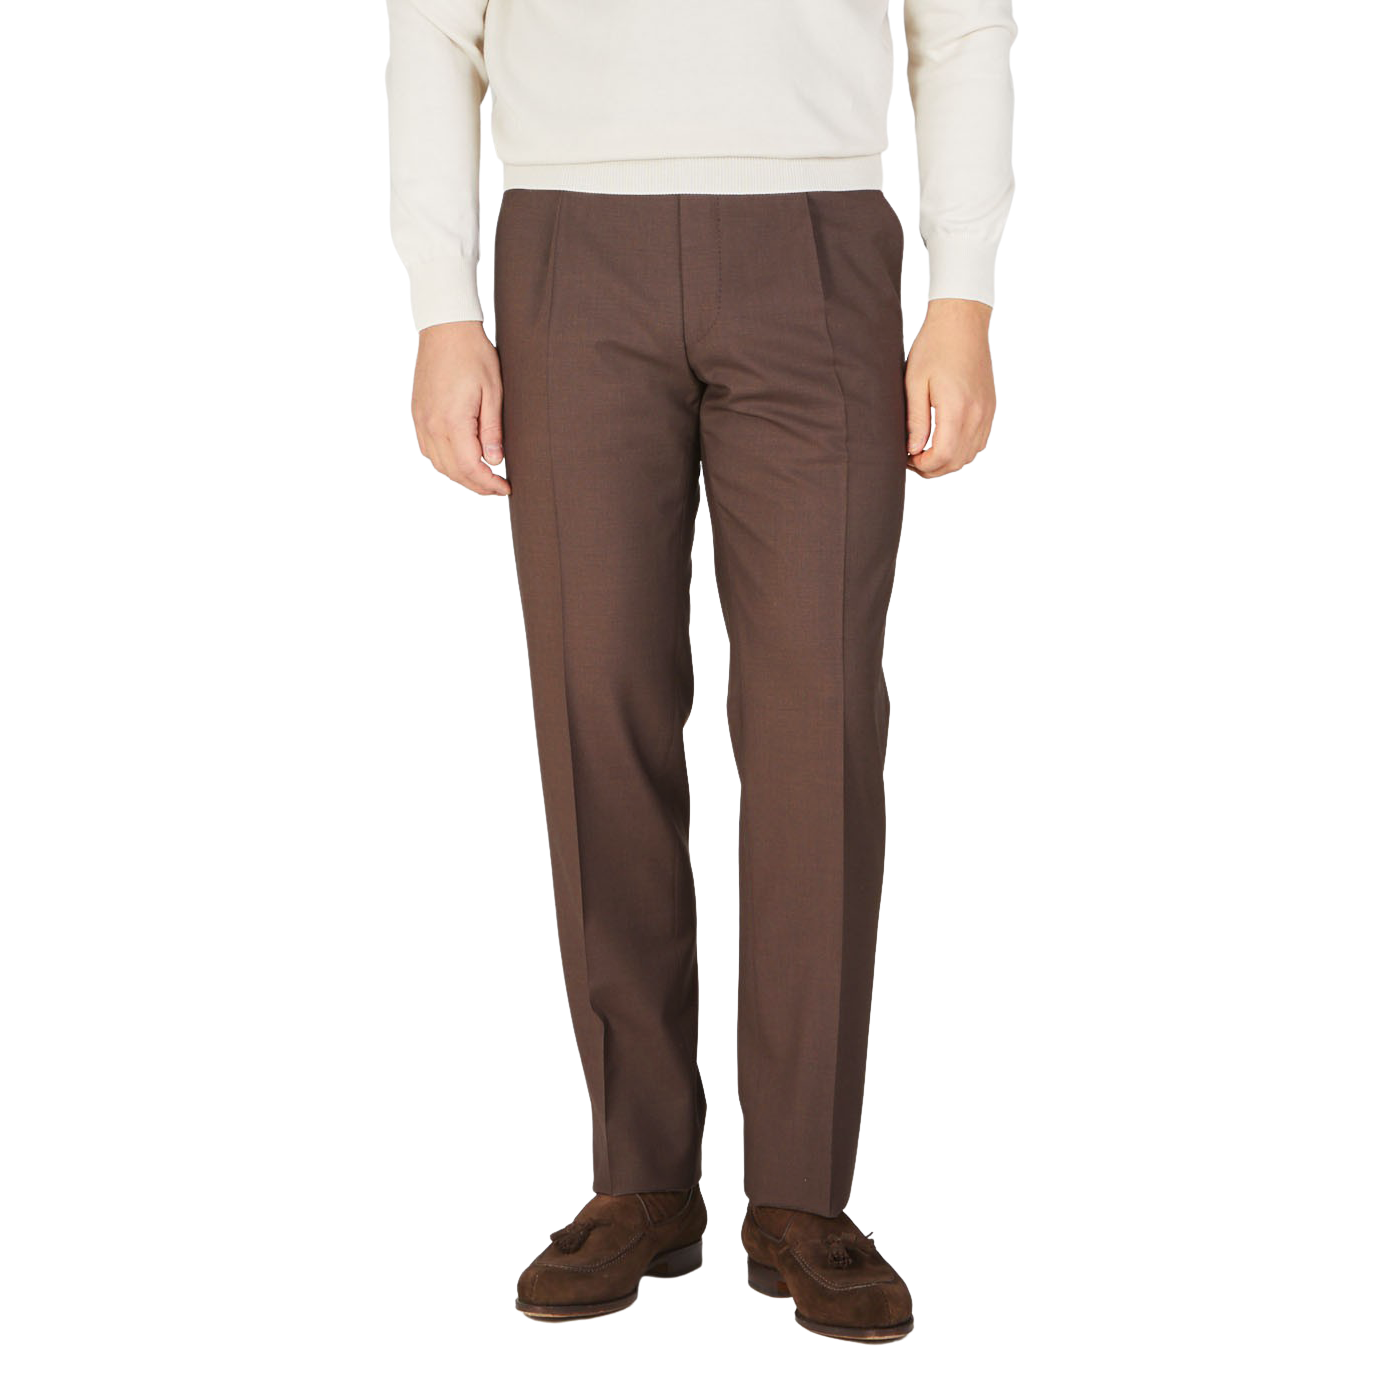 Where to Buy 'The Bear' Thom Browne Pants Jeremy Allen White Mentions in  Season 2